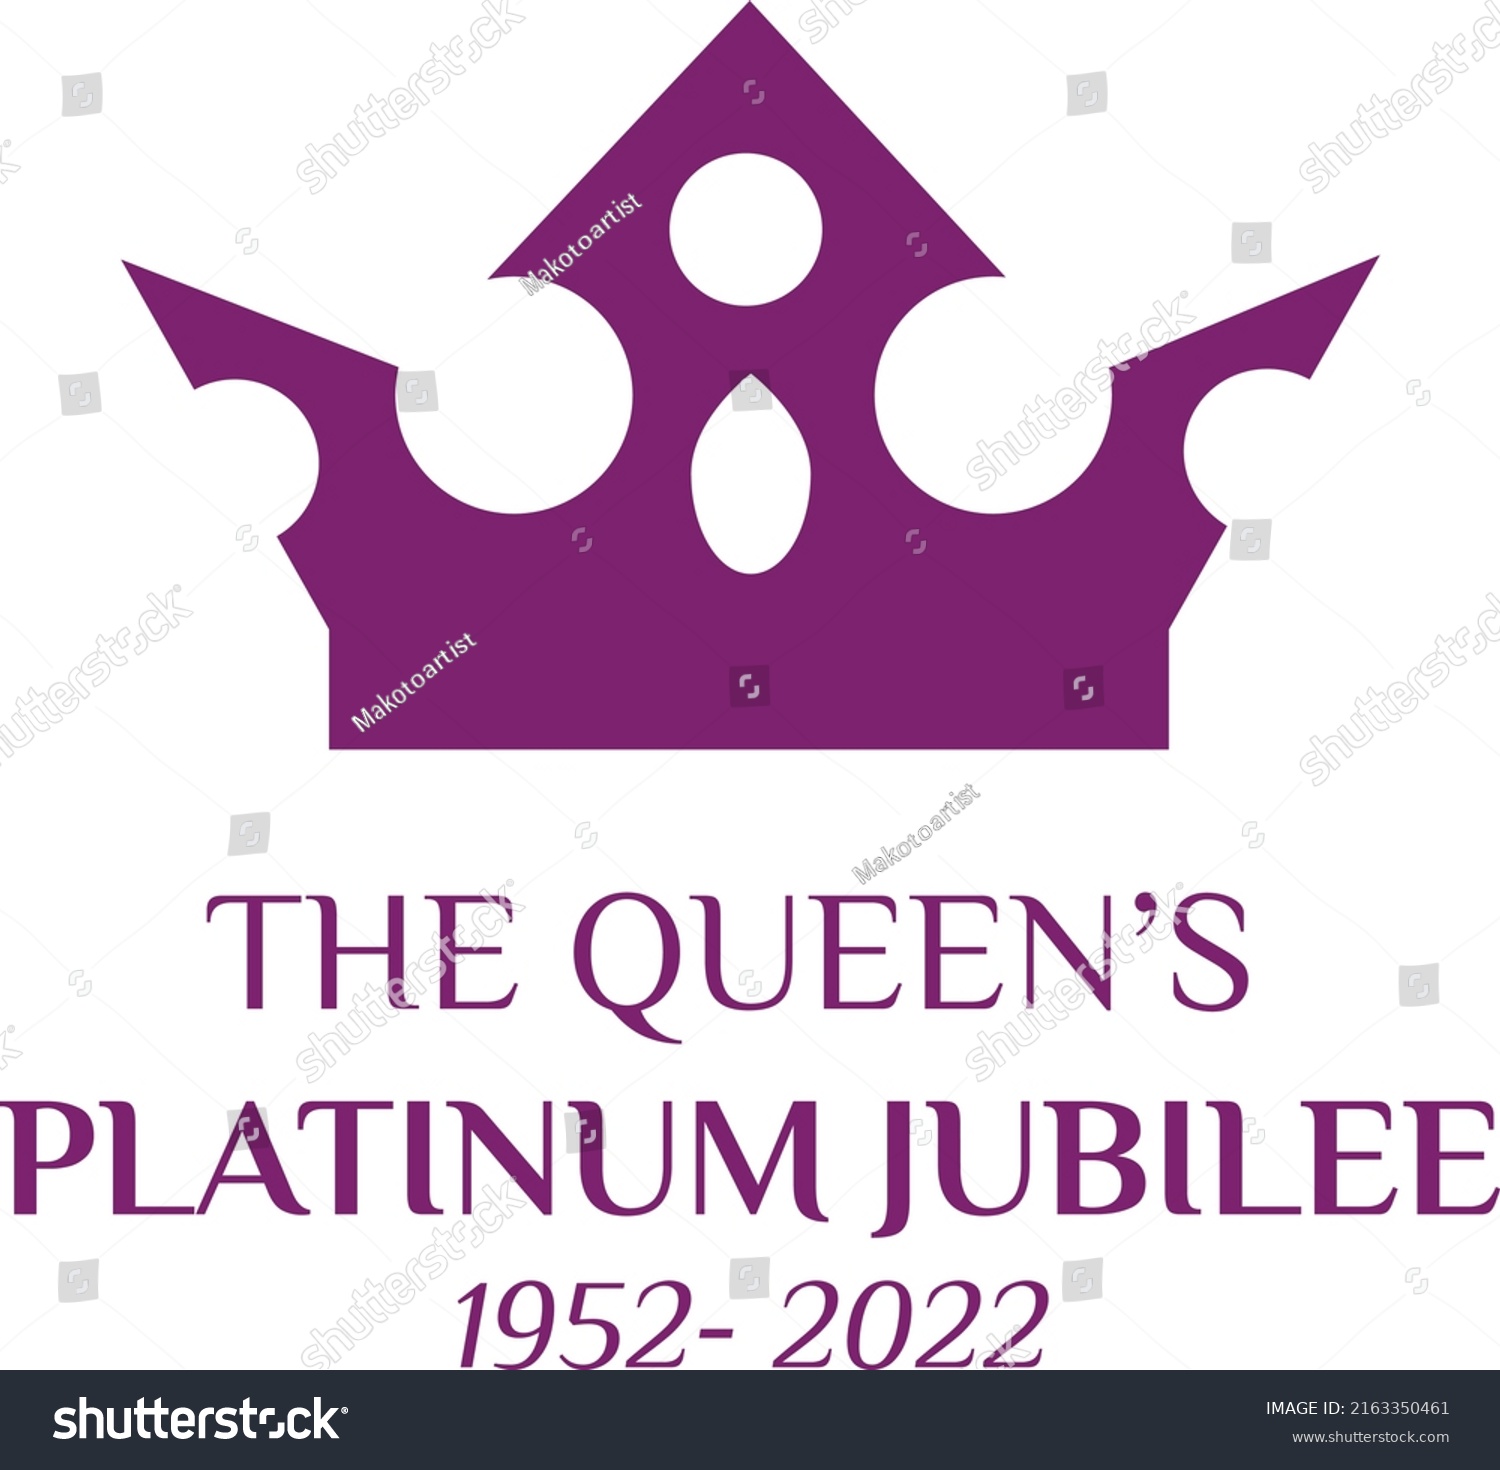 SVG of The Queen's Platinum Jubilee celebration banner with side profile of Queen Elizabeth in crown 70 years. Ideal design for banners, flayers, social media, stickers, greeting cards svg